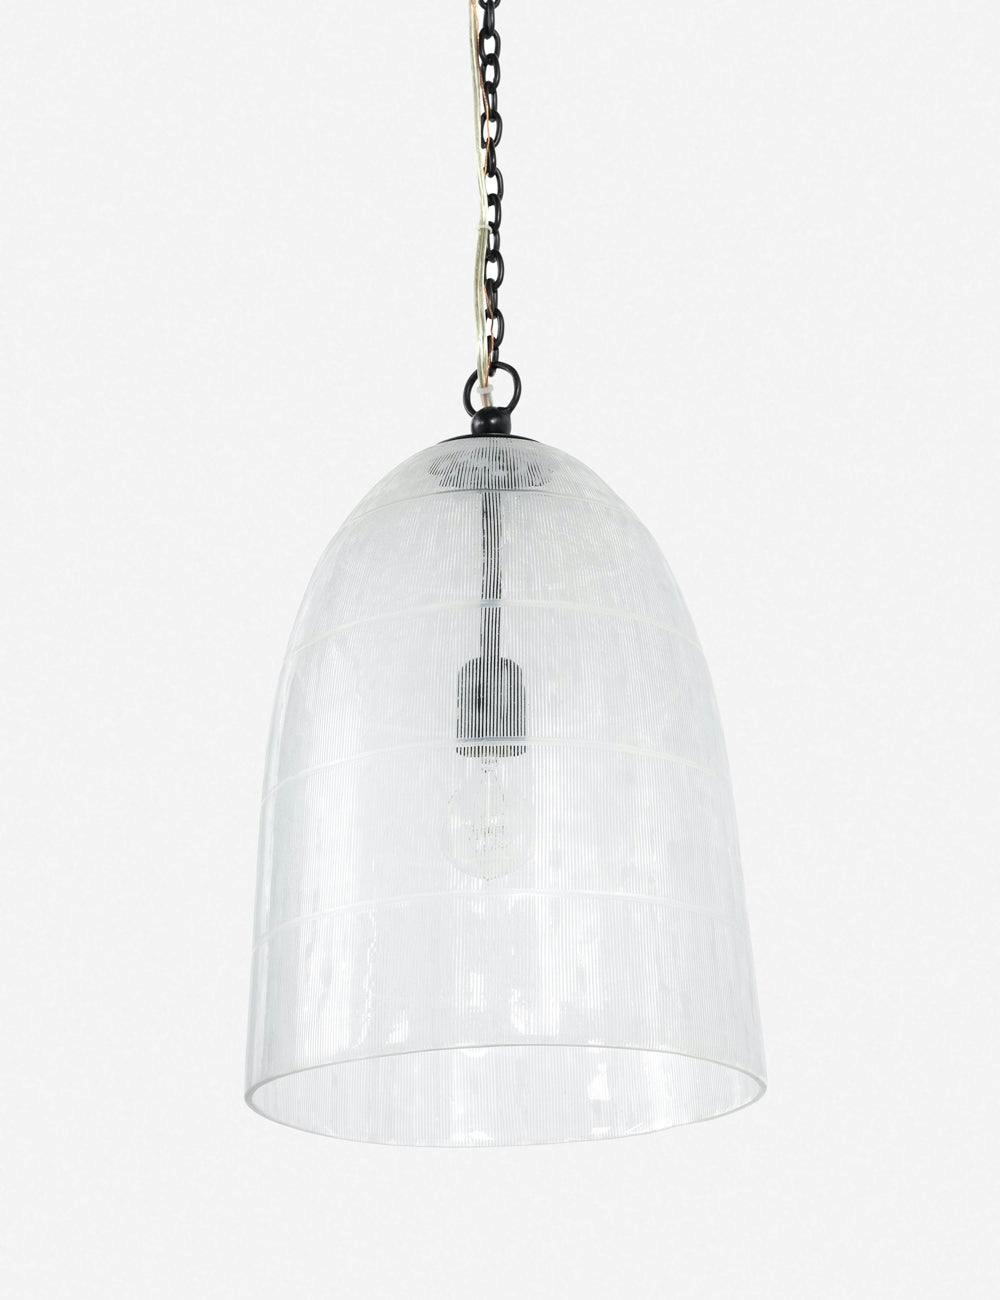 Ephram 12" Hand-Etched Glass Pendant Light in Antiqued Iron